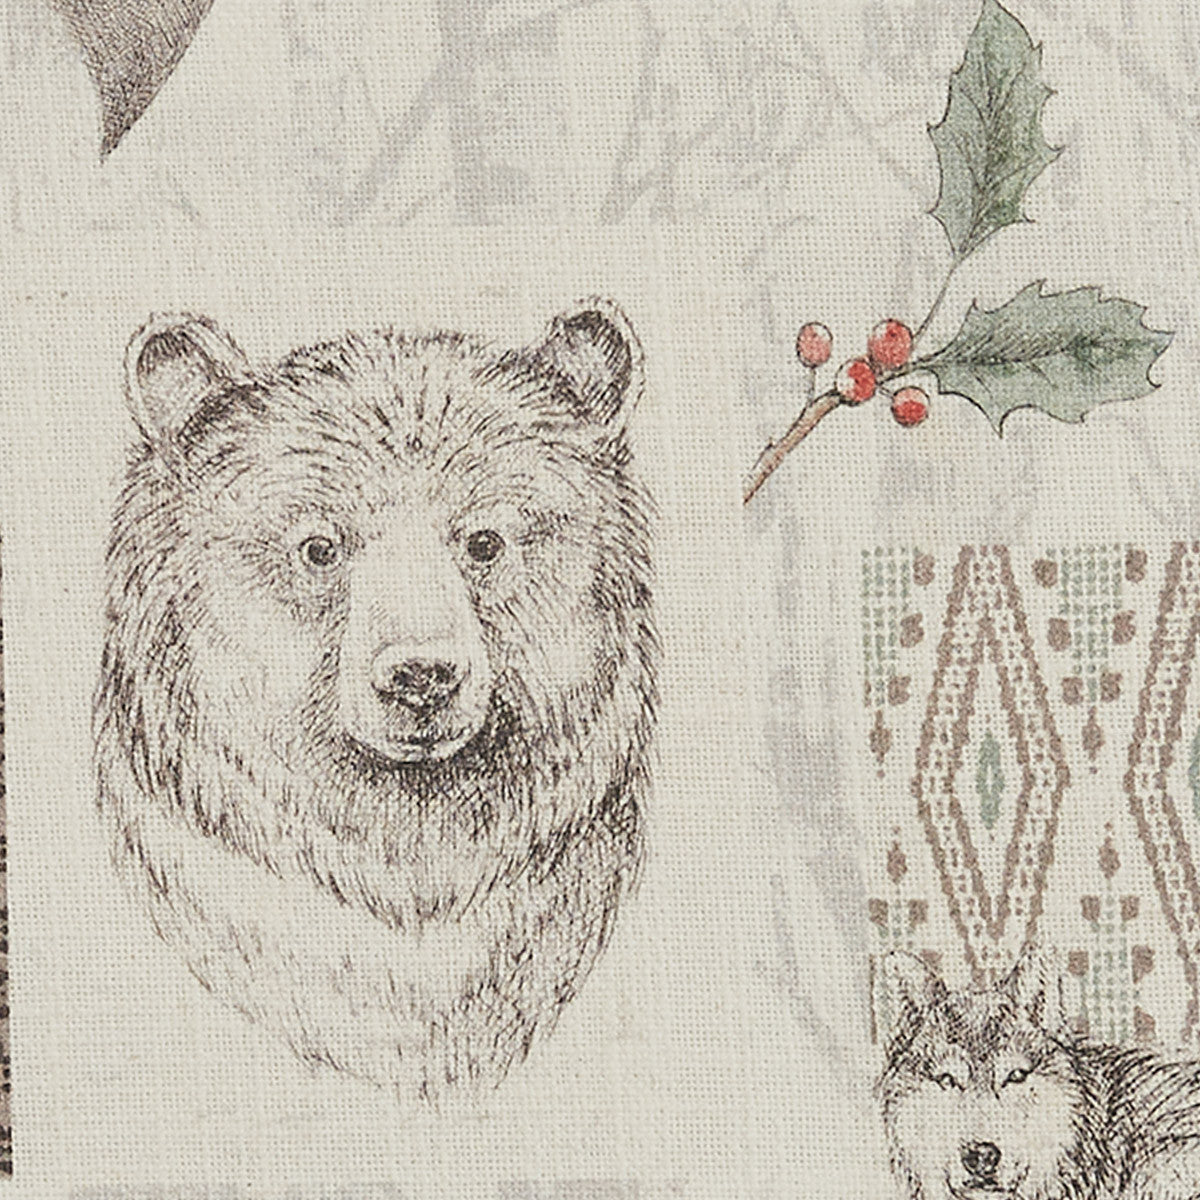 Wild And Beautiful Holiday Placemats - Set of 4 Park Designs